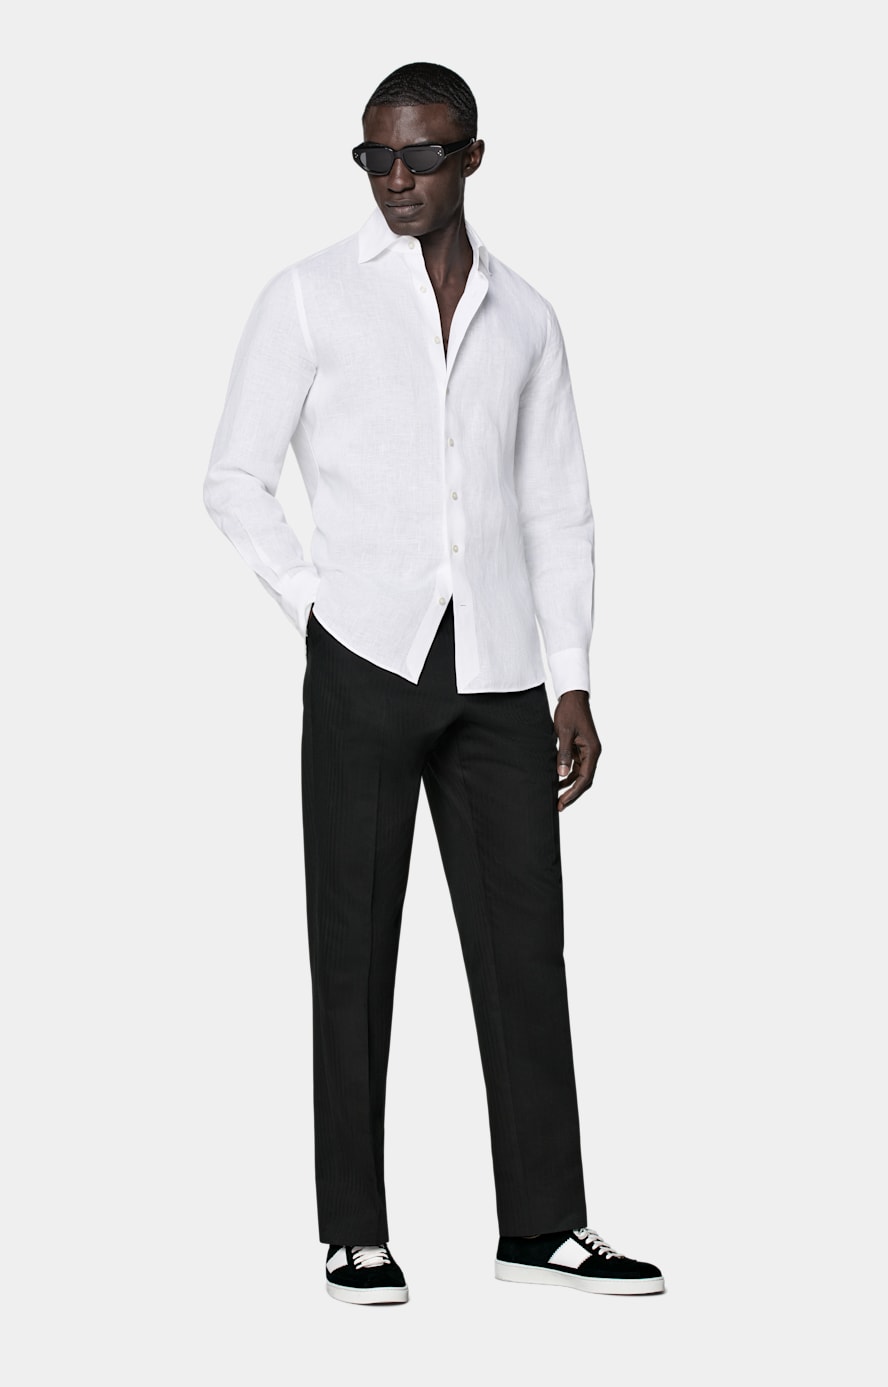 White Tailored Fit Shirt